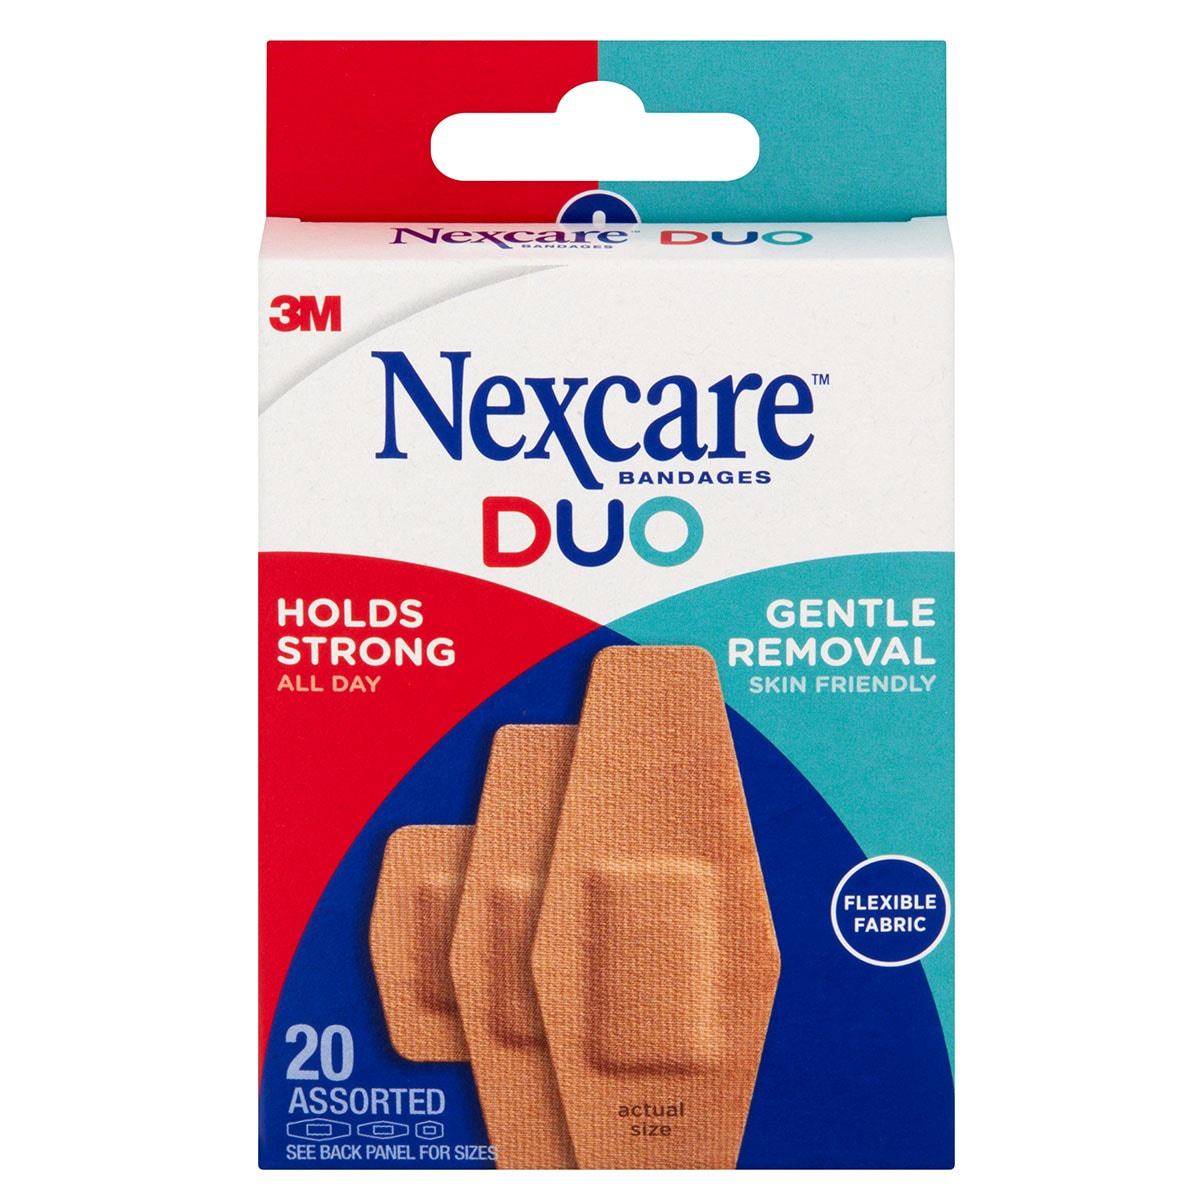 Nexcare Duo Fabric Bandages Assorted 20 Pack